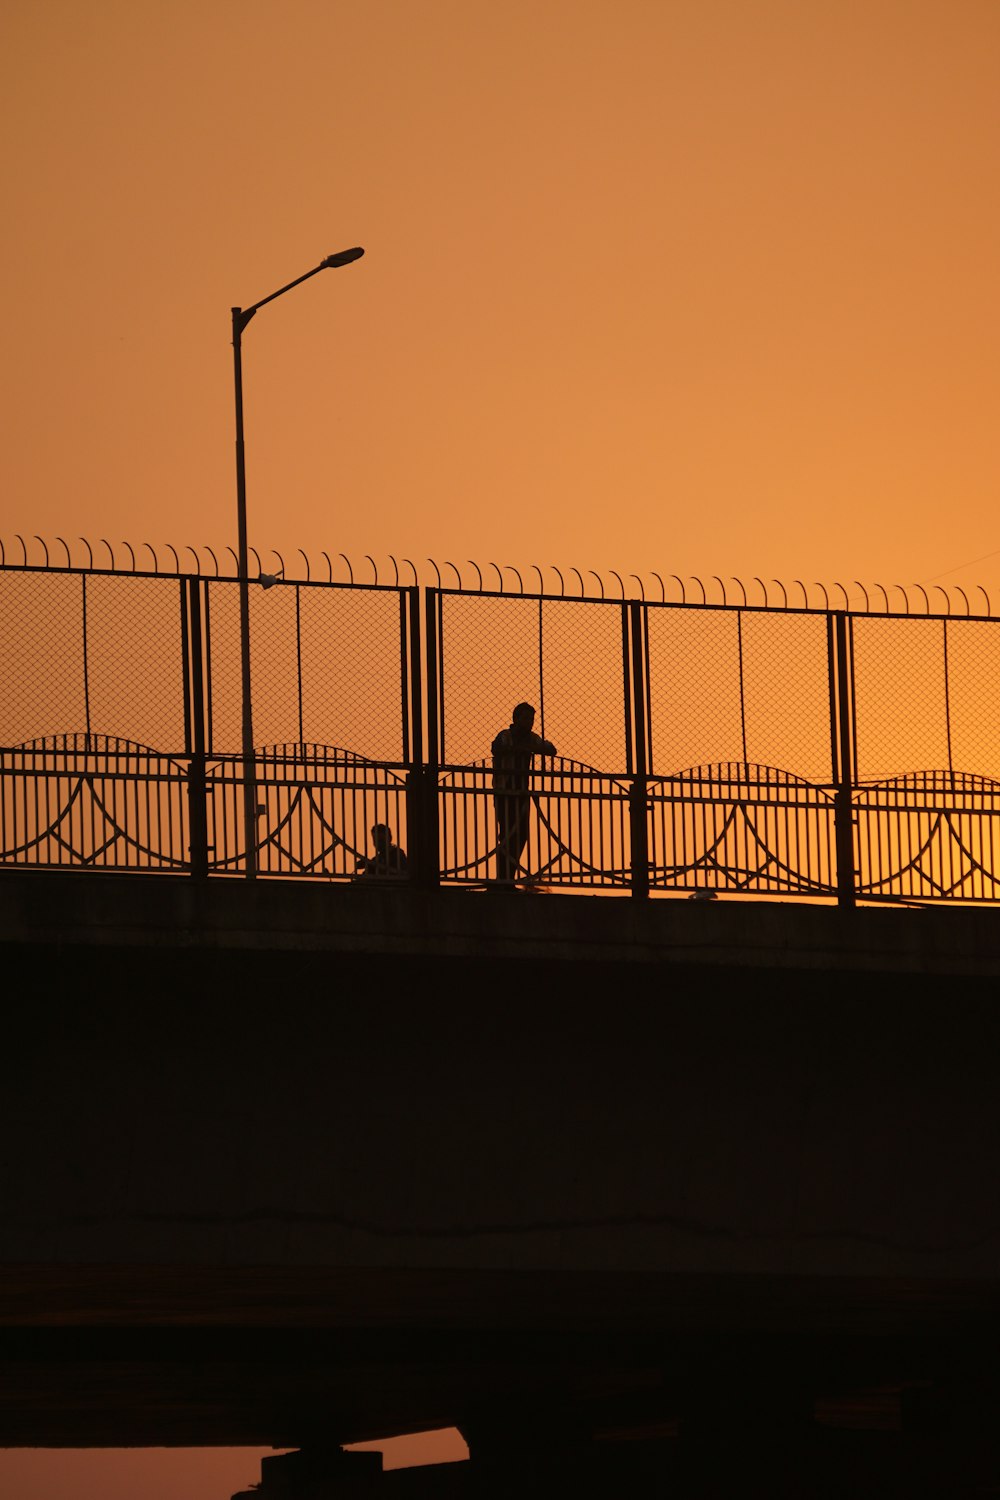 silhouette of 2 person standing beside fence during sunset